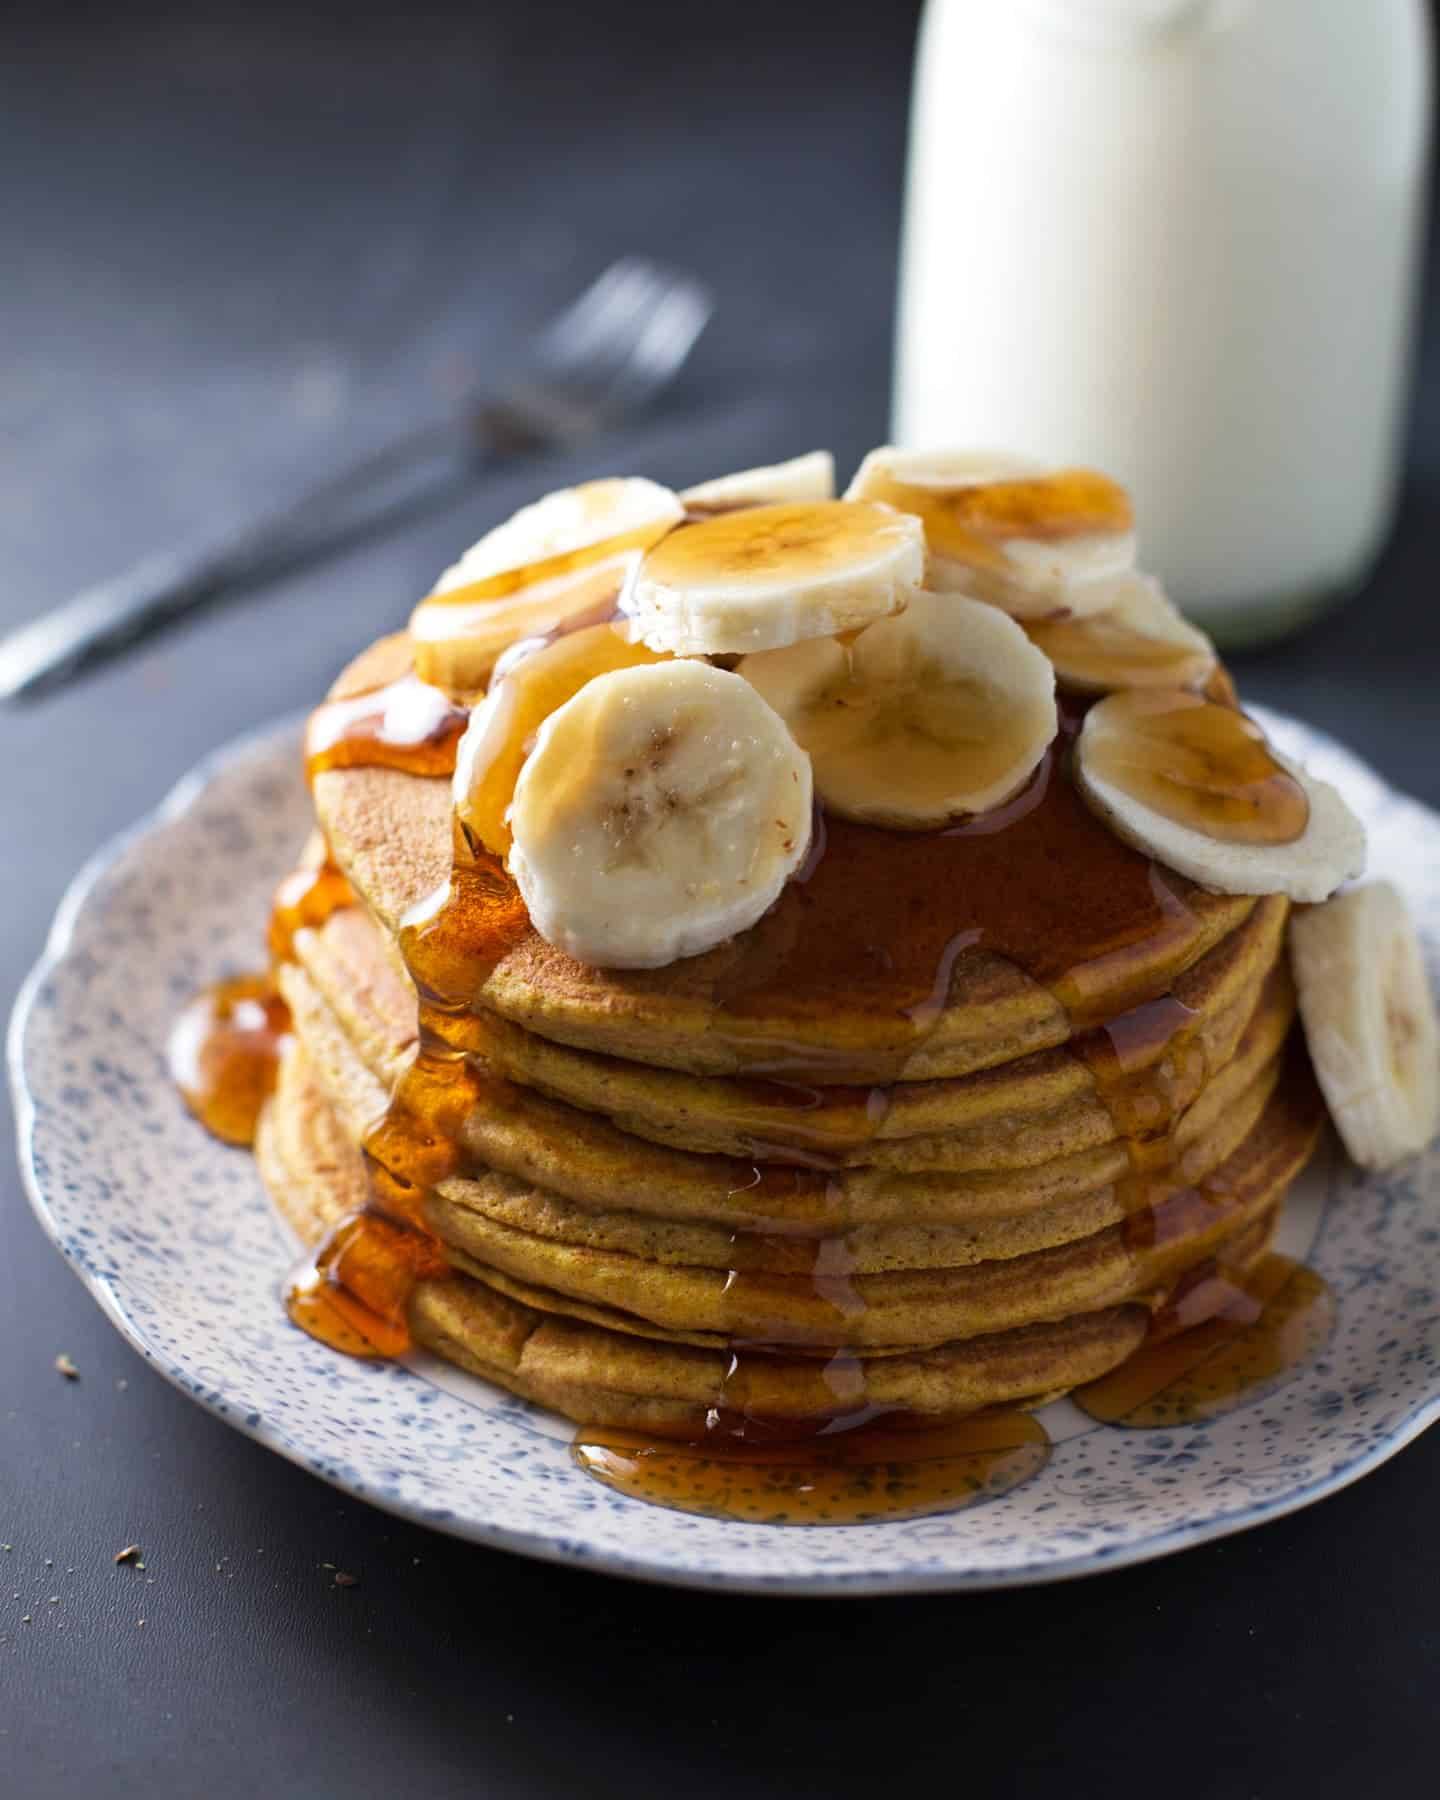 Whole wheat pumpkin pancakes stacked on a plate with bananas and syrup.